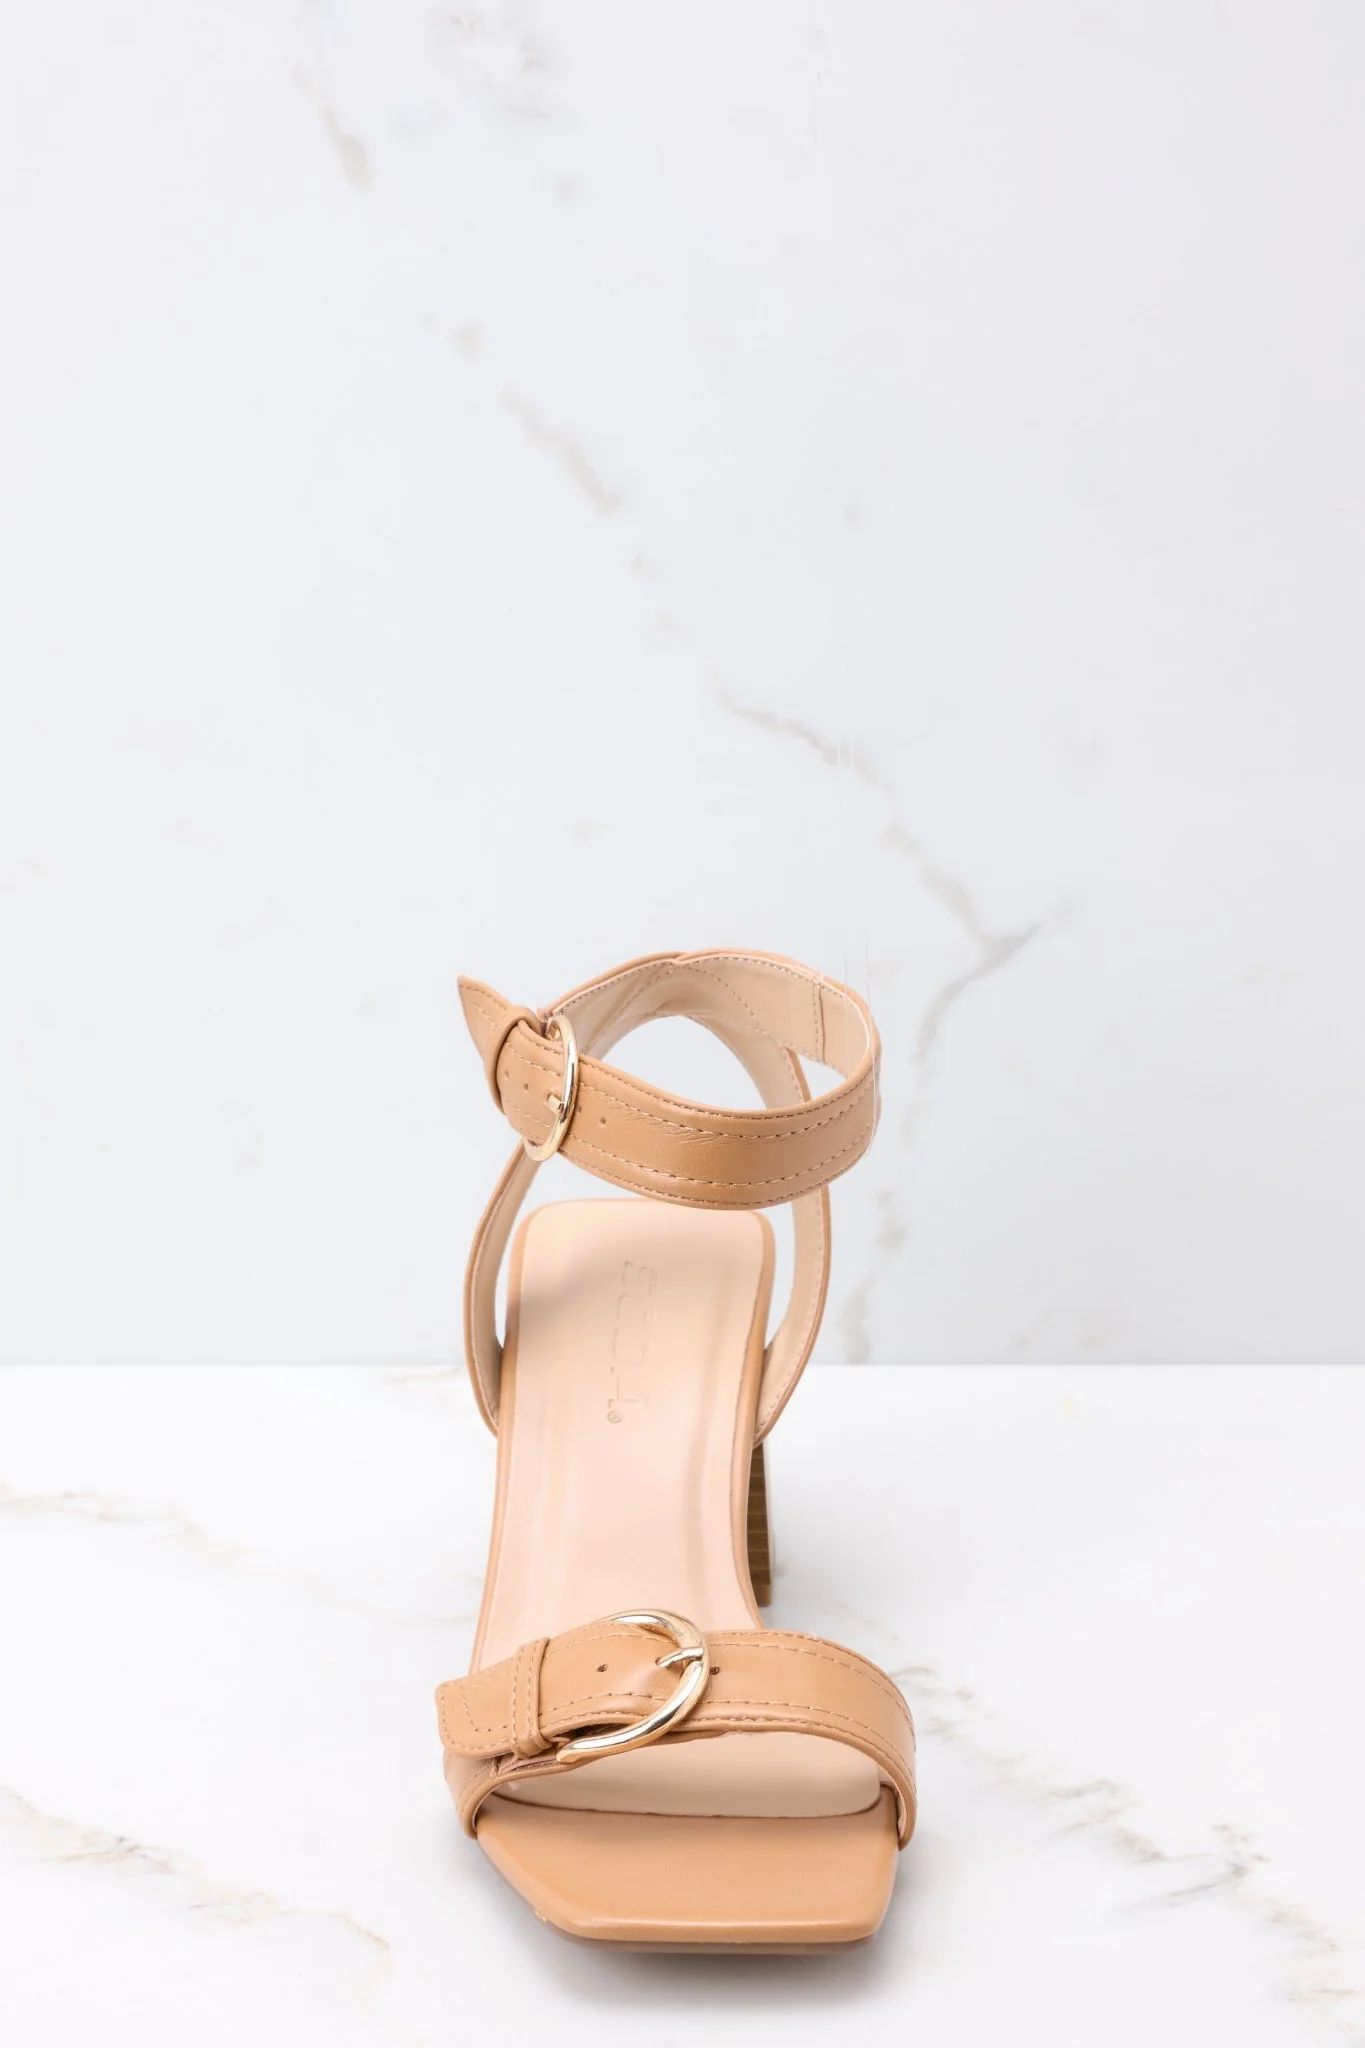 Follow My Step Camel Ankle Strap High Heels | Red Dress 